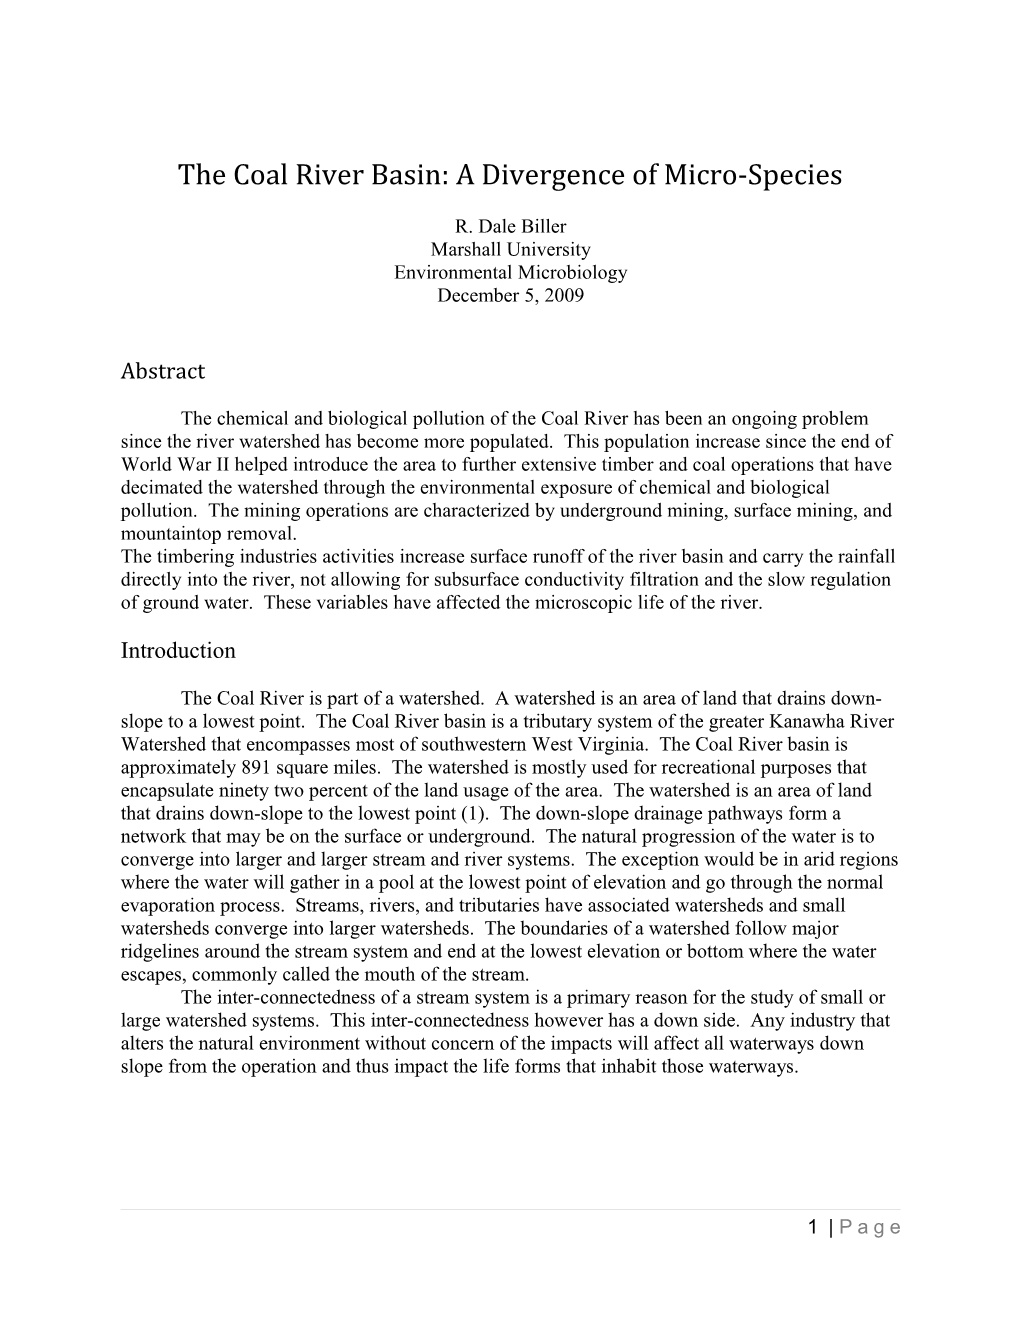 The Coal River Basin: a Divergence of Micro-Species